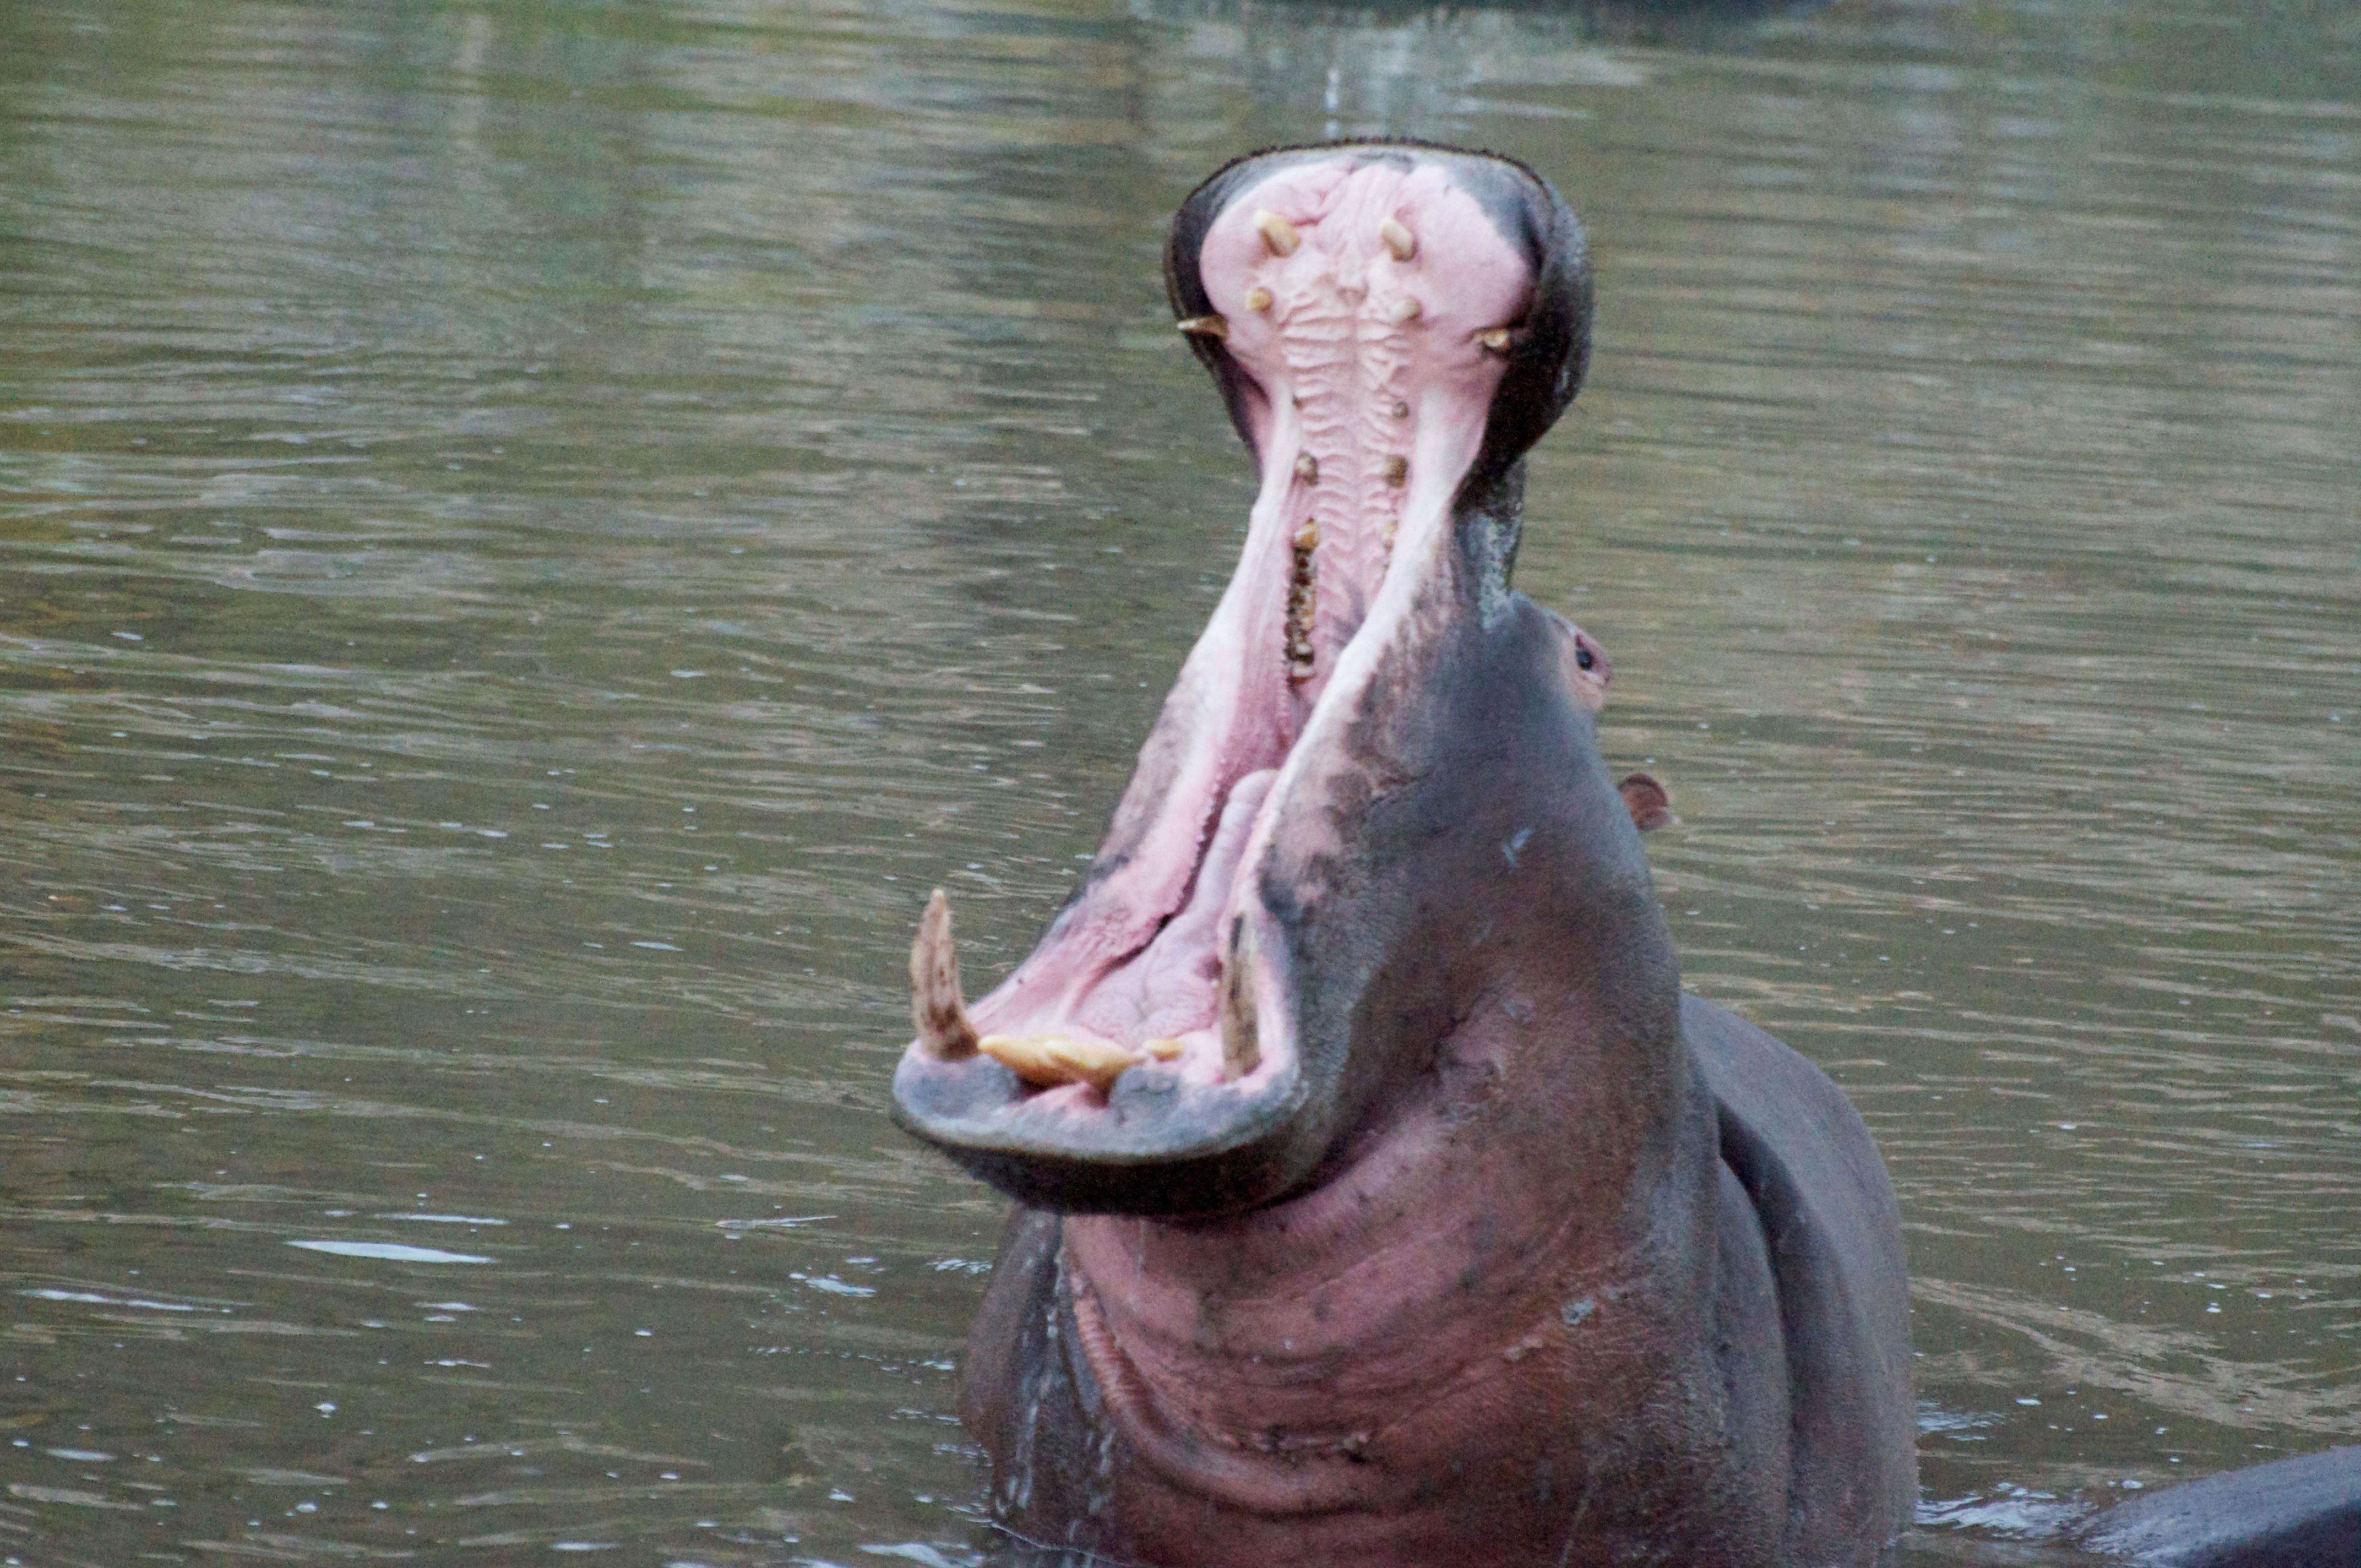 Hippo_mouth_opening.jpg